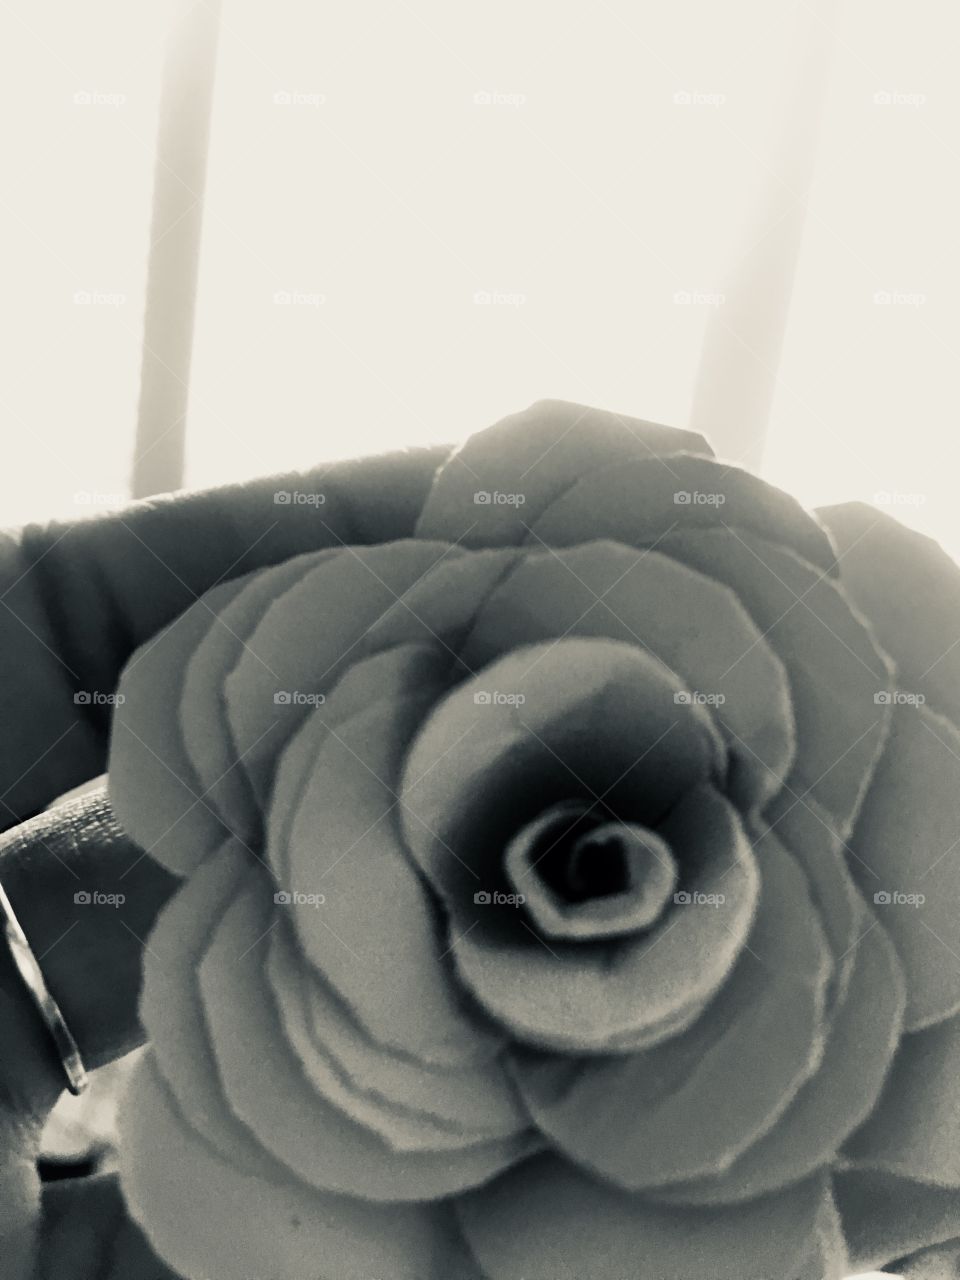 A deal and beautiful photo of a paper flower with natural lighting of open windows. The brightness of the ring draws more attention to the flower 